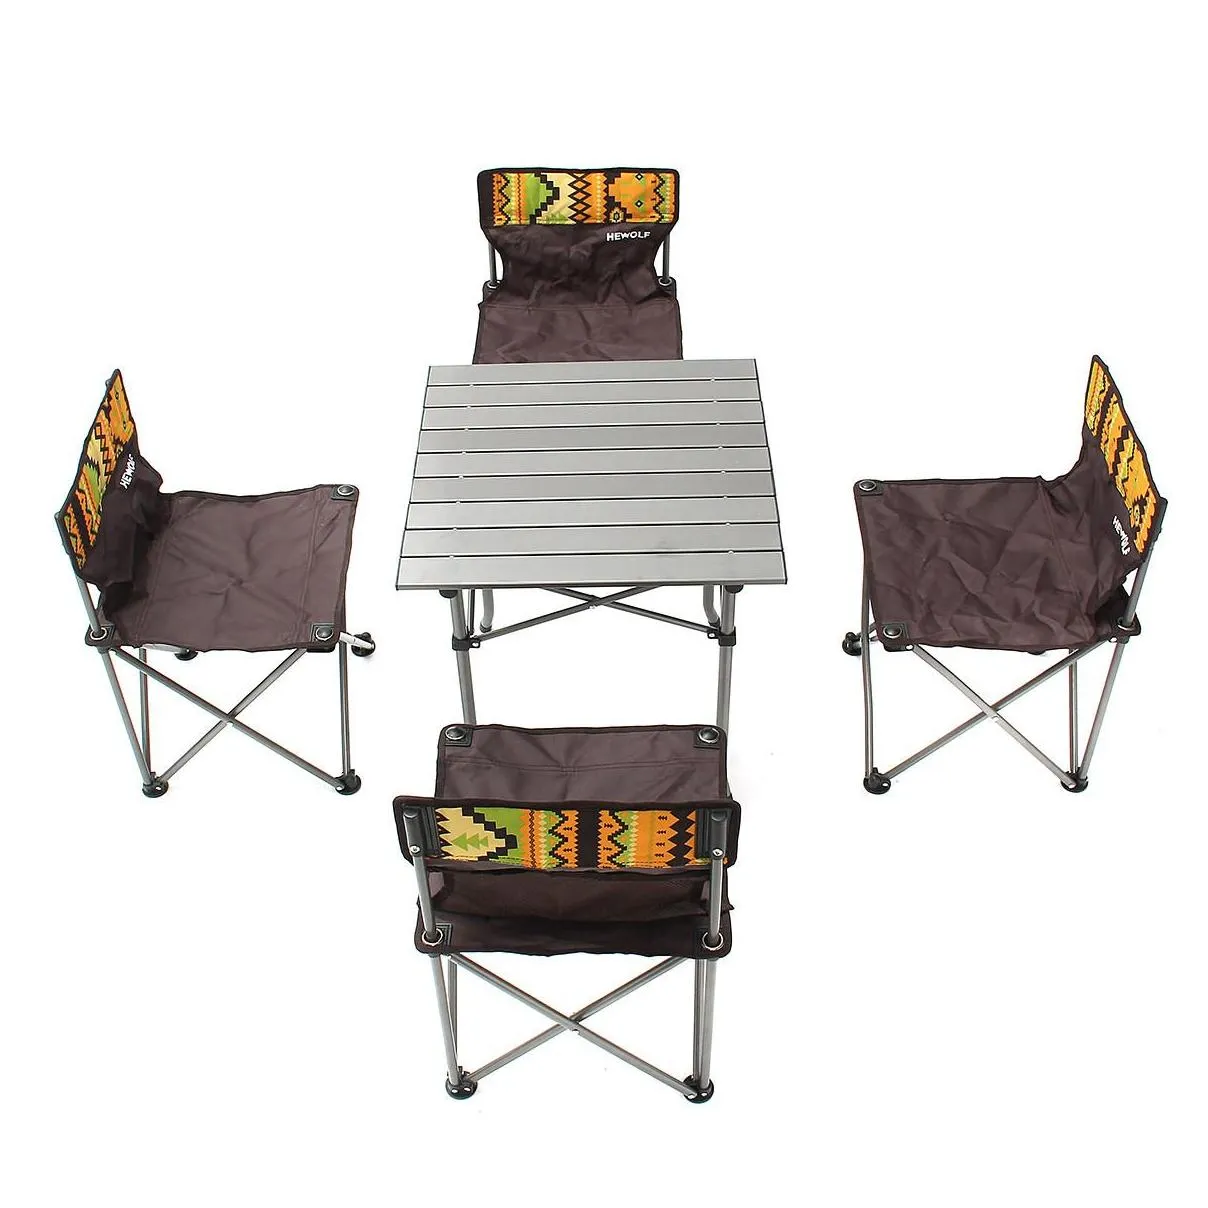 Aluminum frame and MDF tabletop metal folding table chairs for camping picnic BBQ prep with Folding Table Chair Stools Set